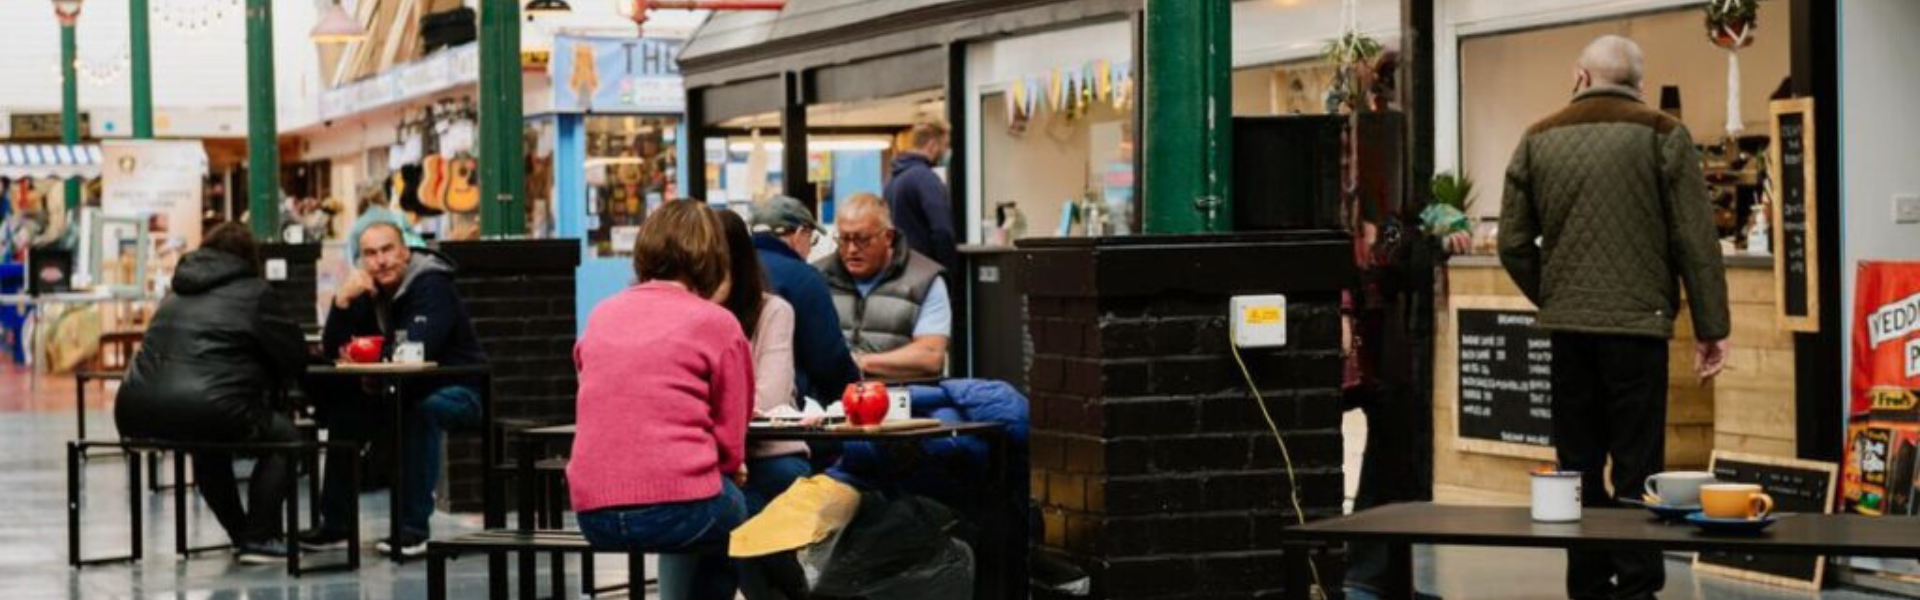 Image of the food court at Wellington market